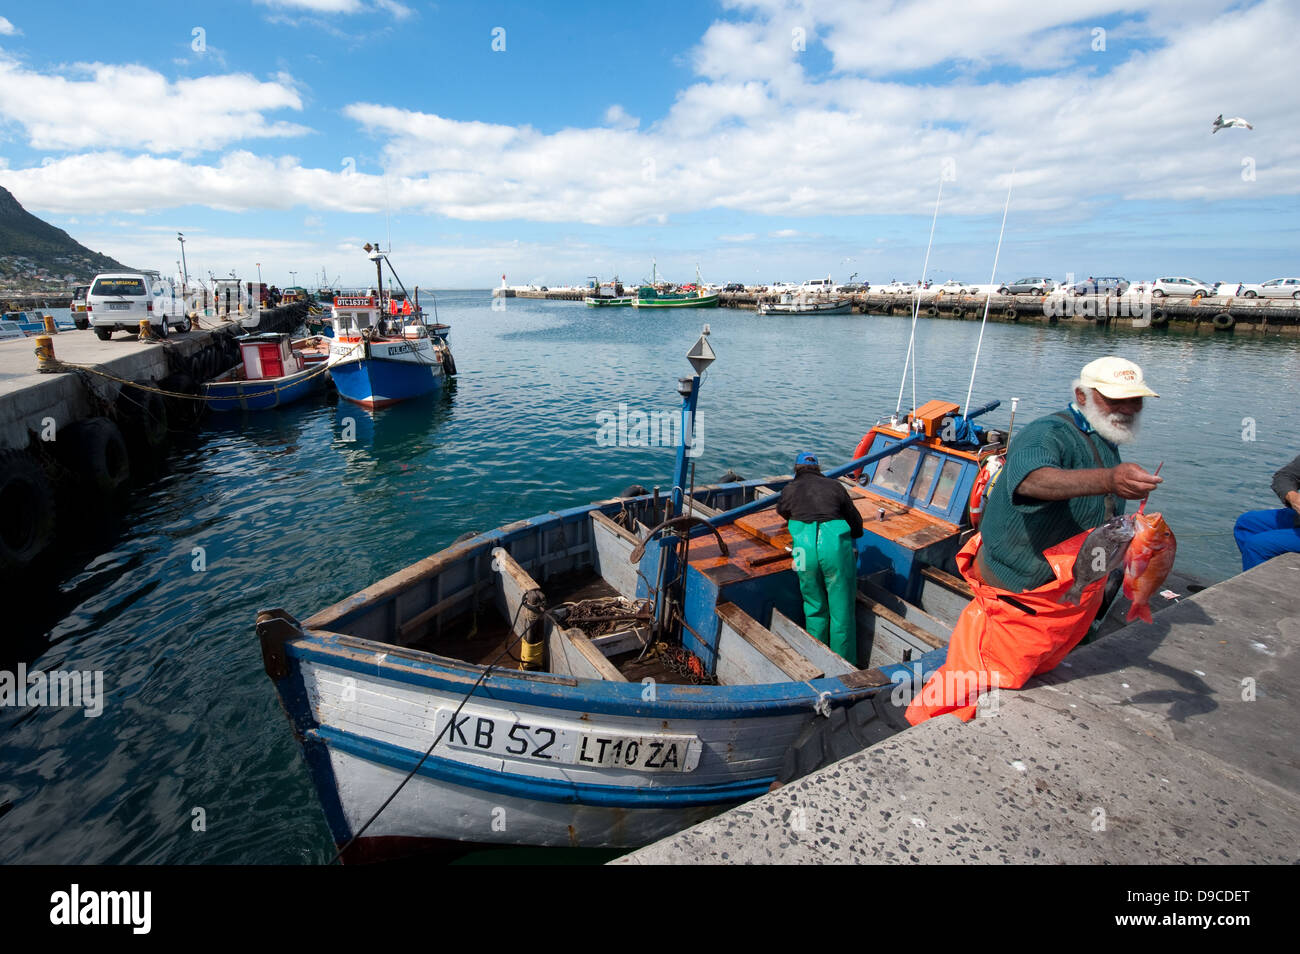 Fishing boats in the harbour, Kalk Bay, False Bay, South Africa Stock Photo